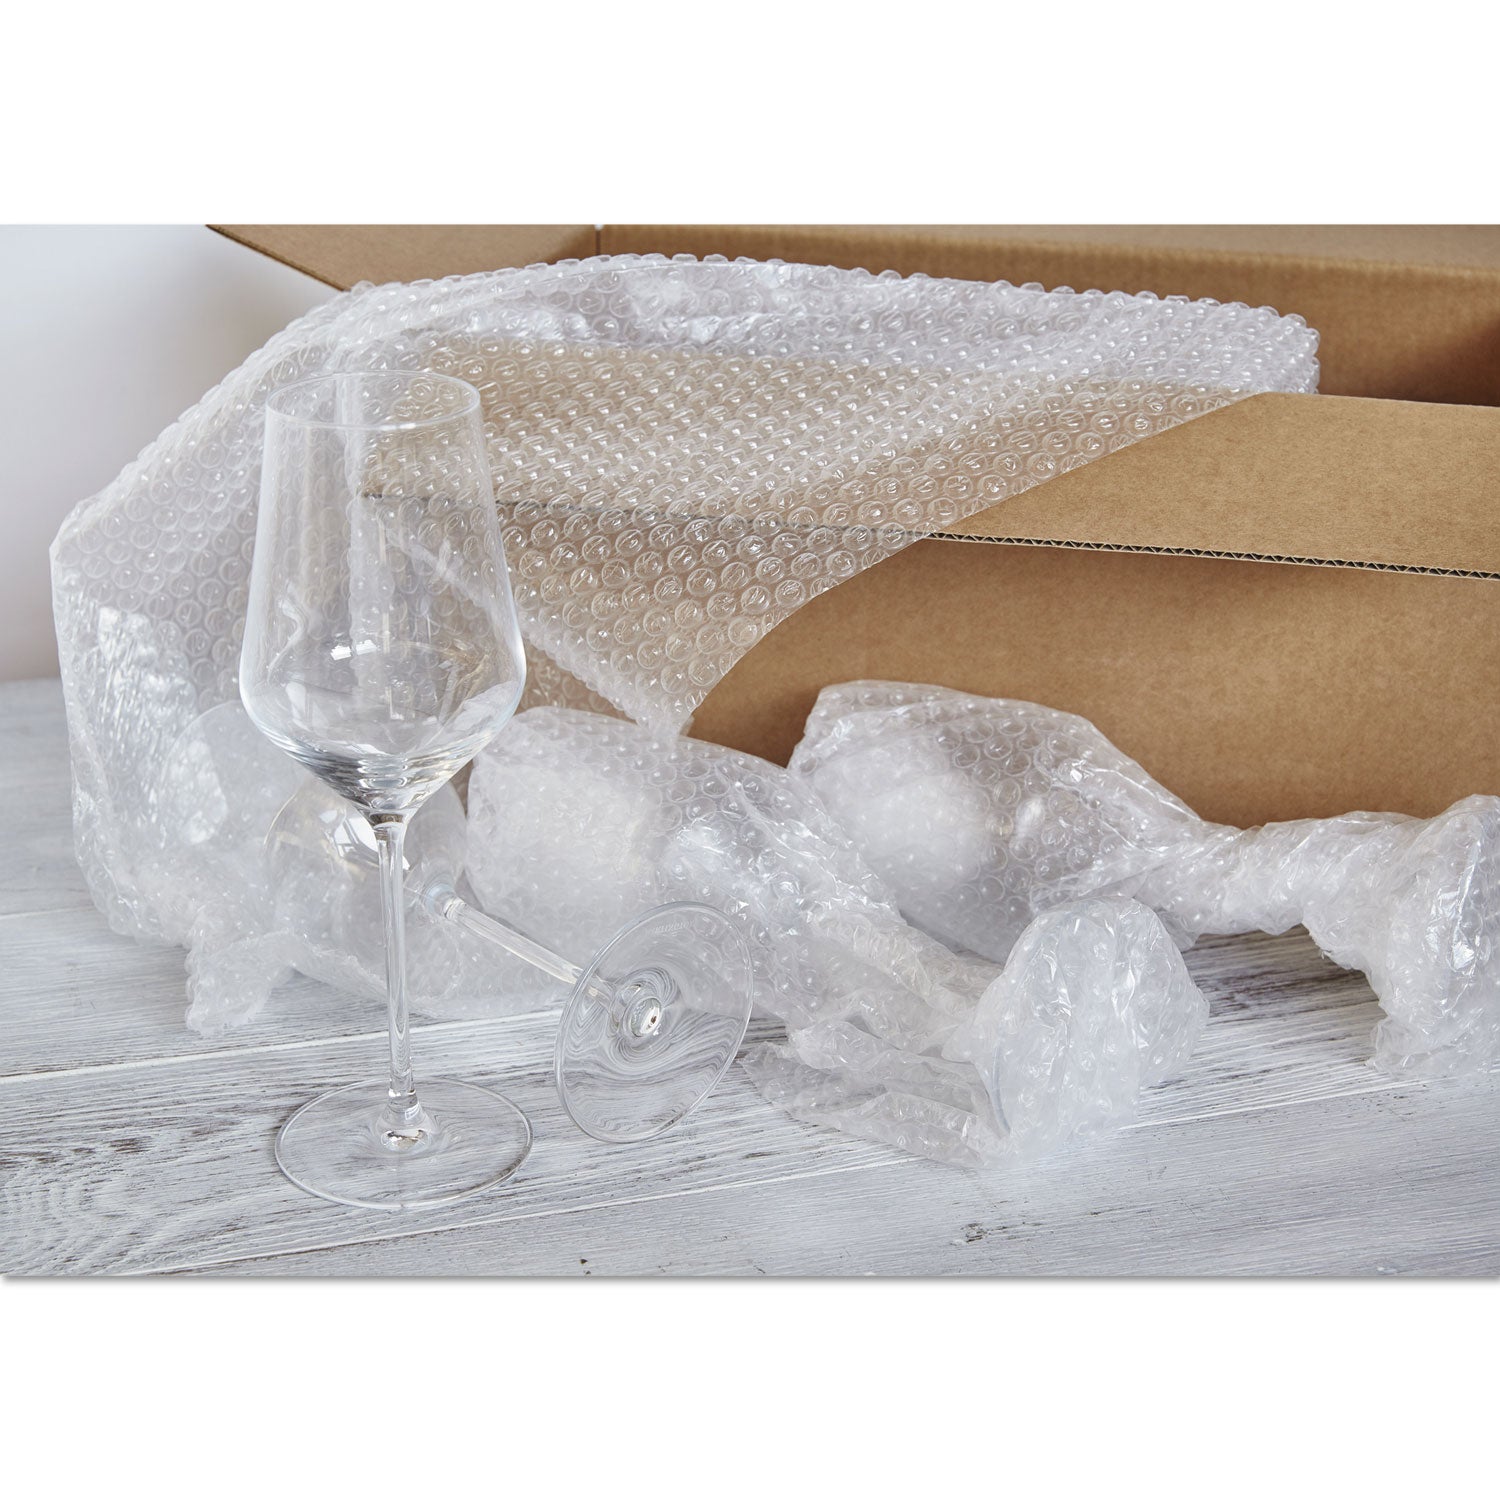 Bubble Wrap Cushioning Material, 0.19" Thick, 12" x 10 ft - 